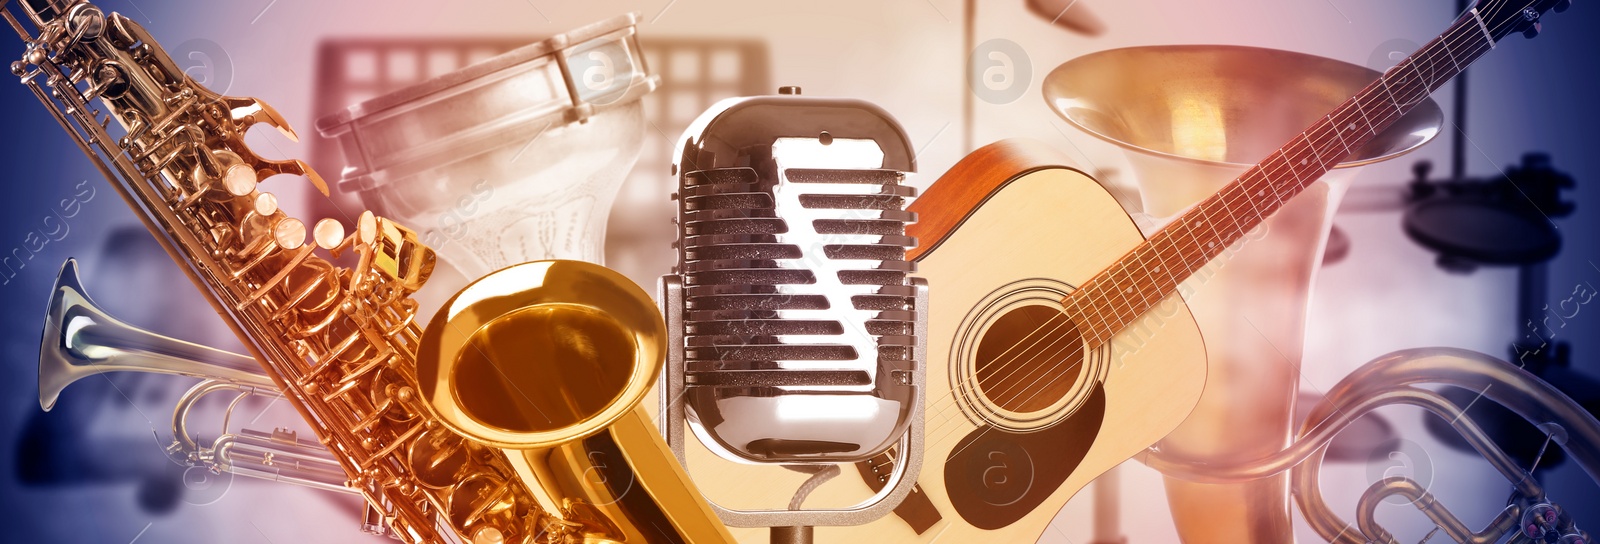 Image of Creative banner design. Vintage microphone and different musical instruments